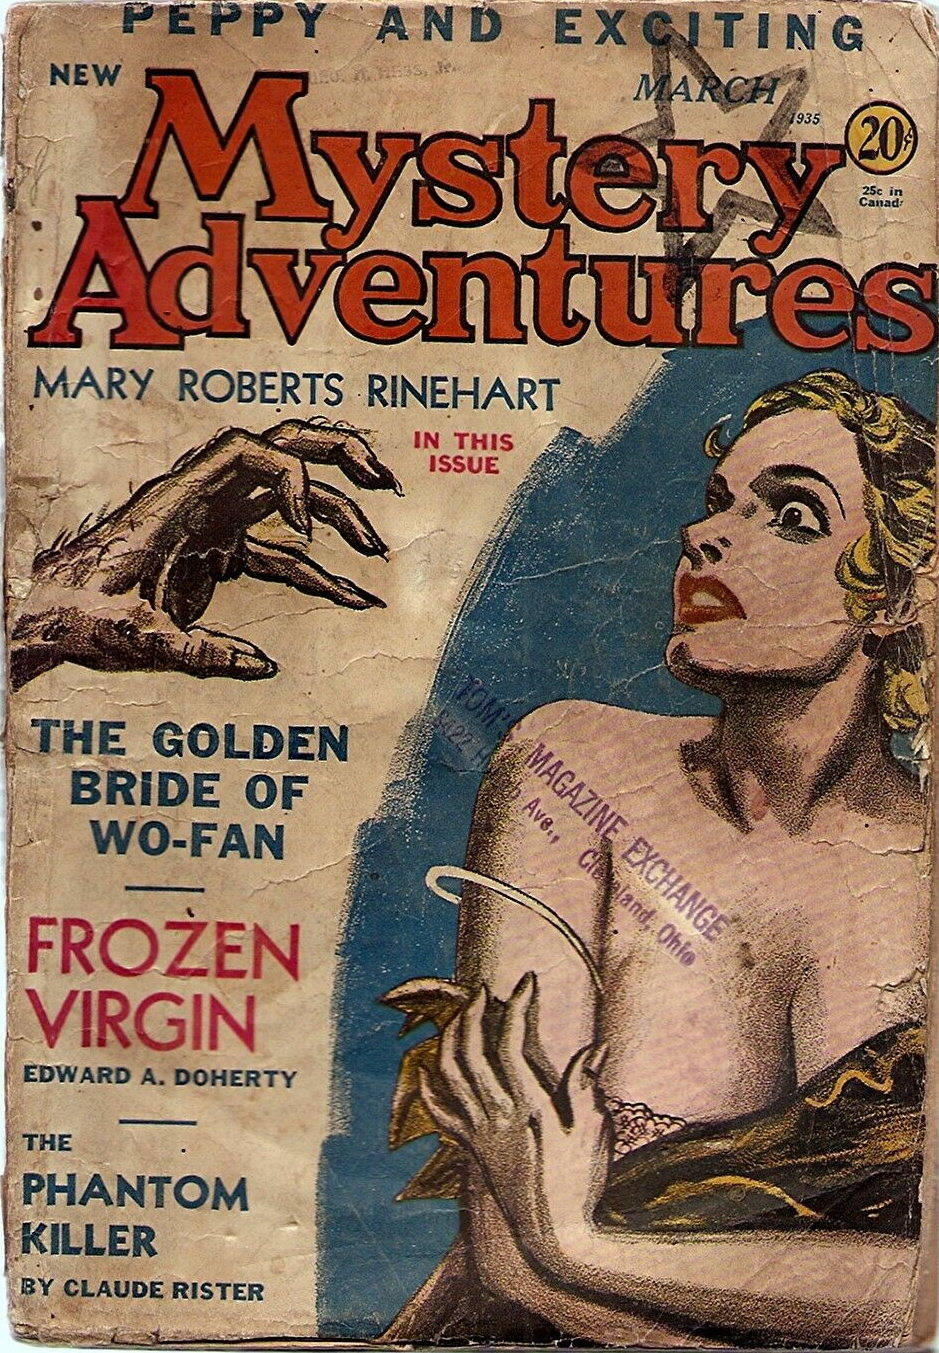 New Mystery Adventures - March 1935